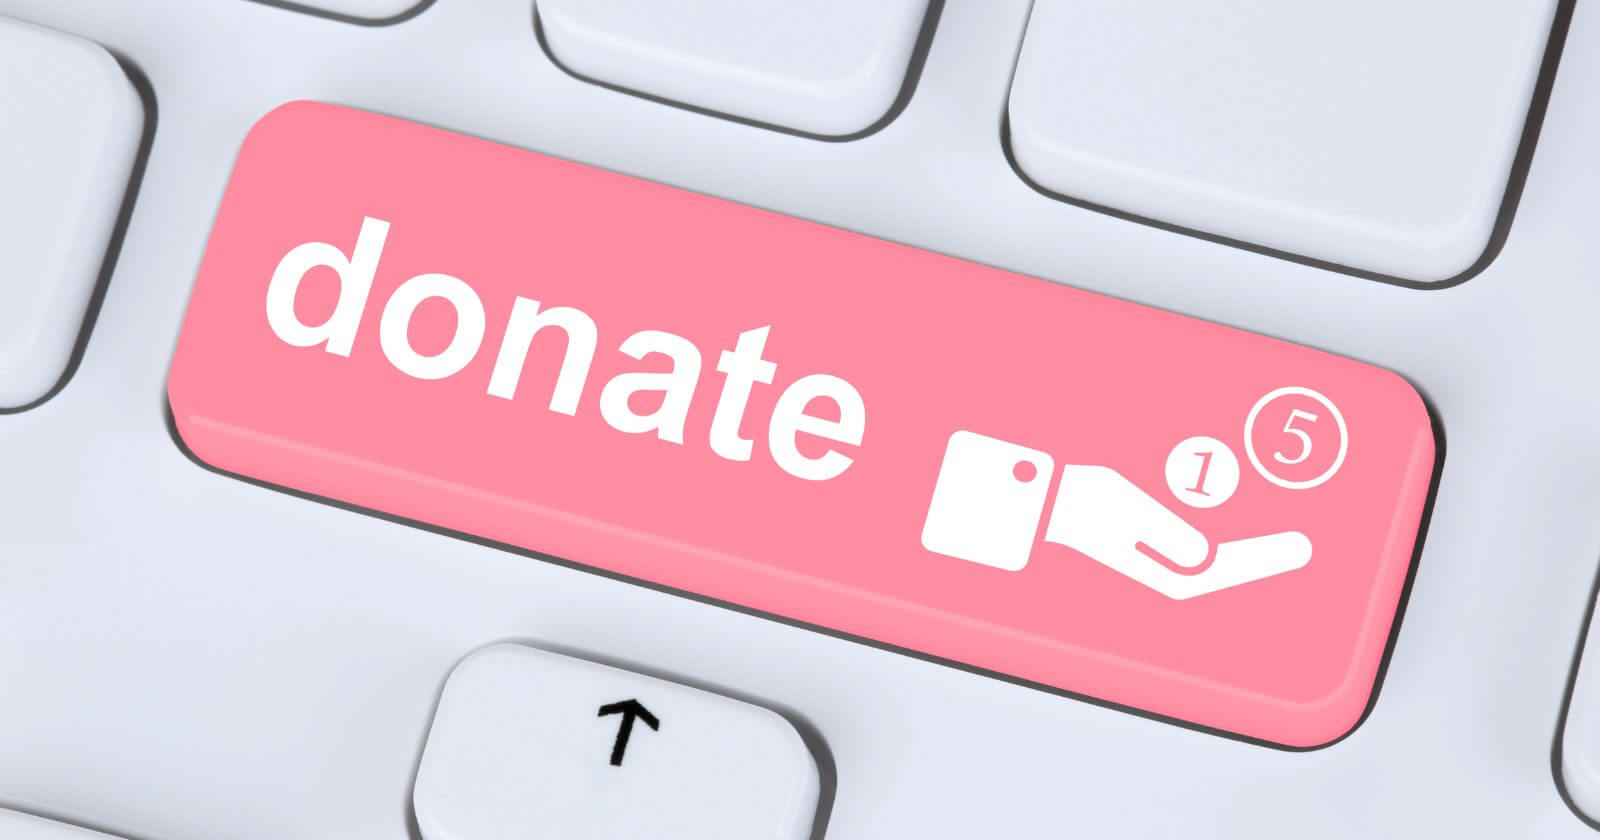 The photo shows donation button.